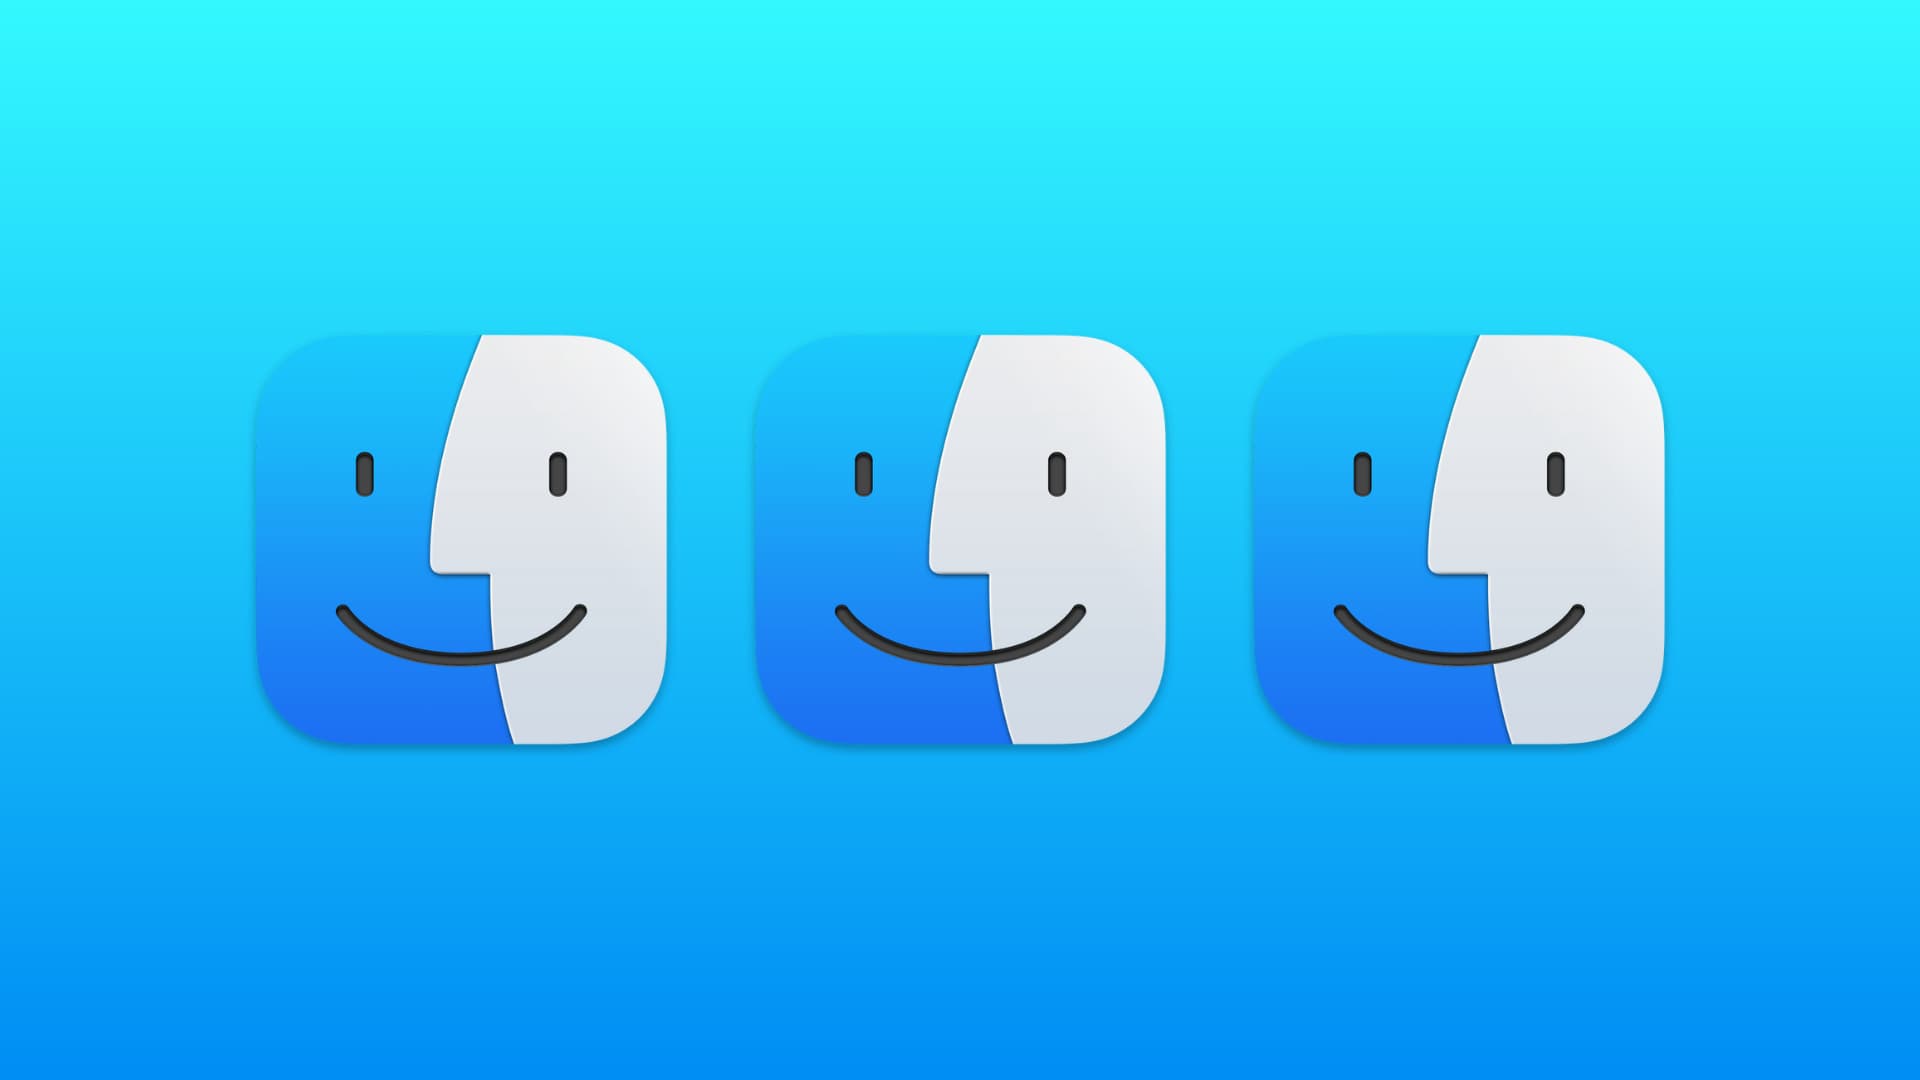 Three Mac Finder icons on a blue gradient background